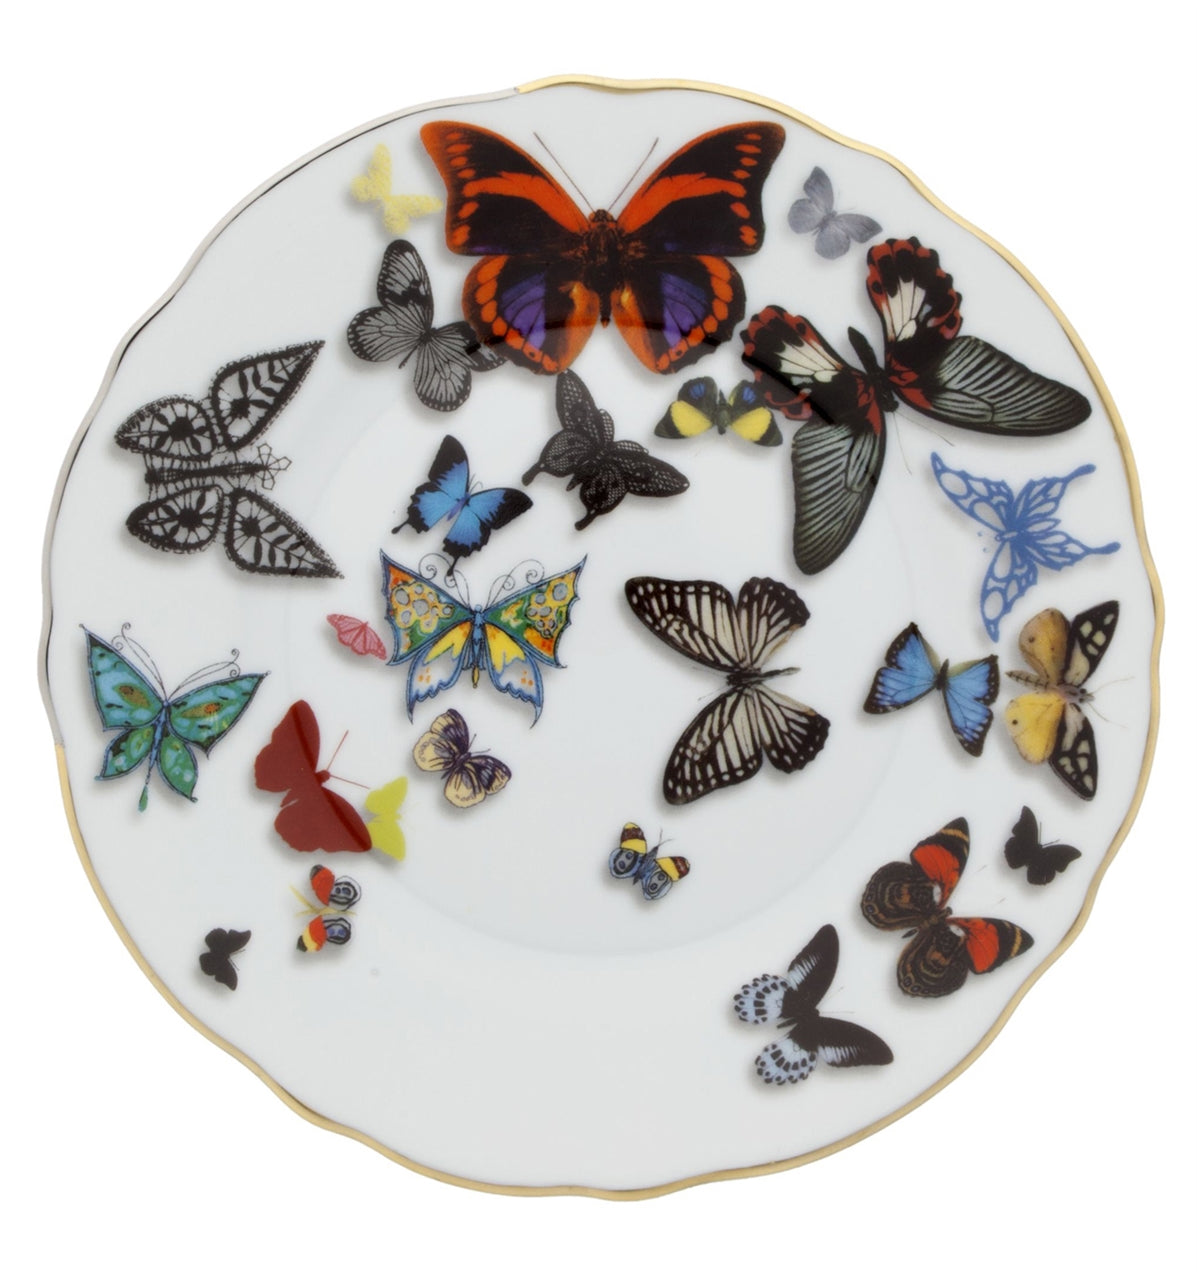 Christian Lacroix - Butterfly Parade - Bread and Butter Plate